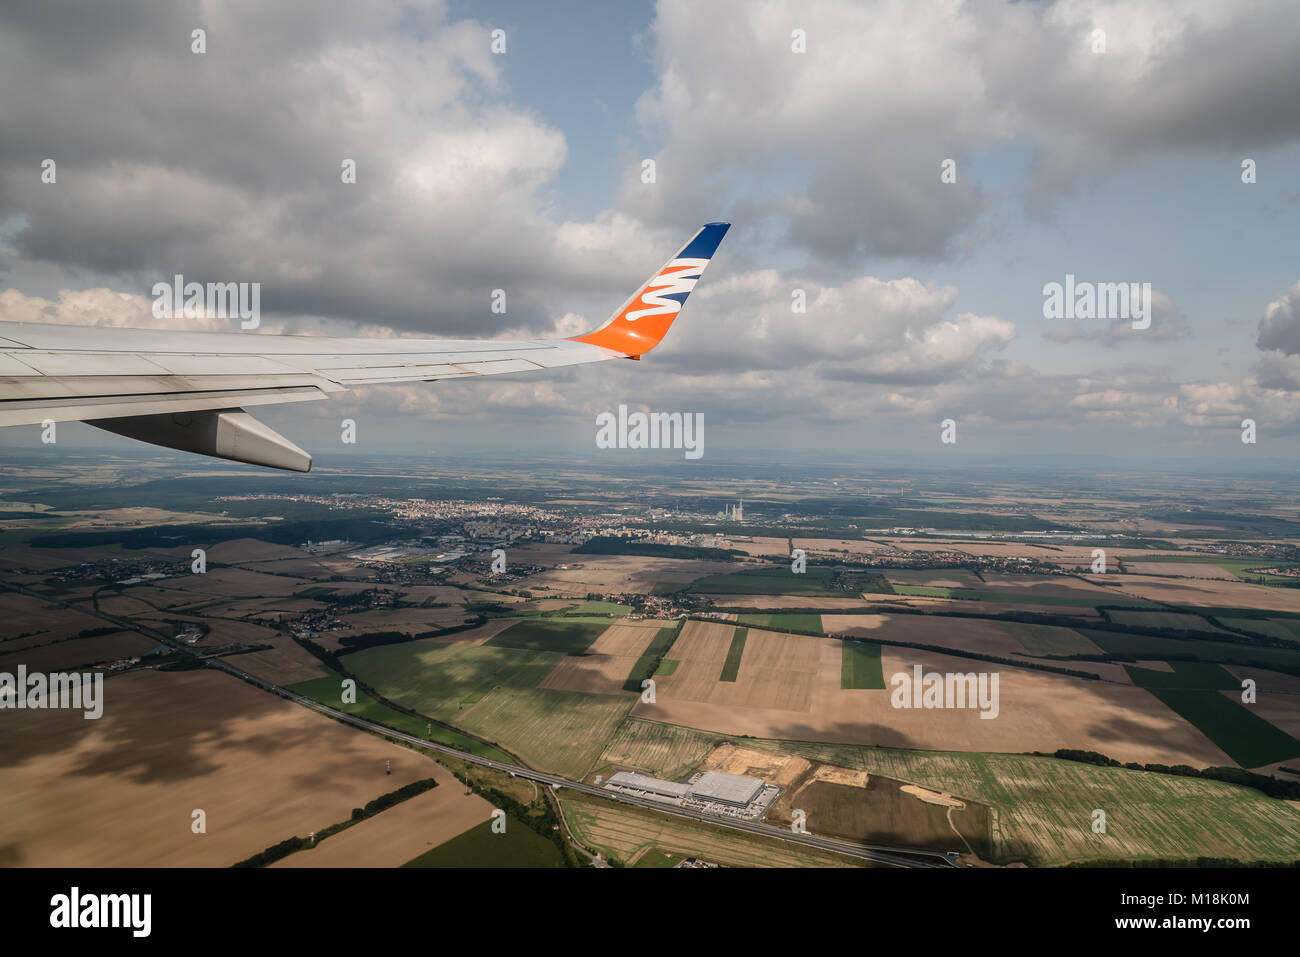 Prague, Czech Republic - August 22, 2017: Airplane wing of Czech airlines short after take off. Amazing view of aircraft wing in altitude during fligh Stock Photo